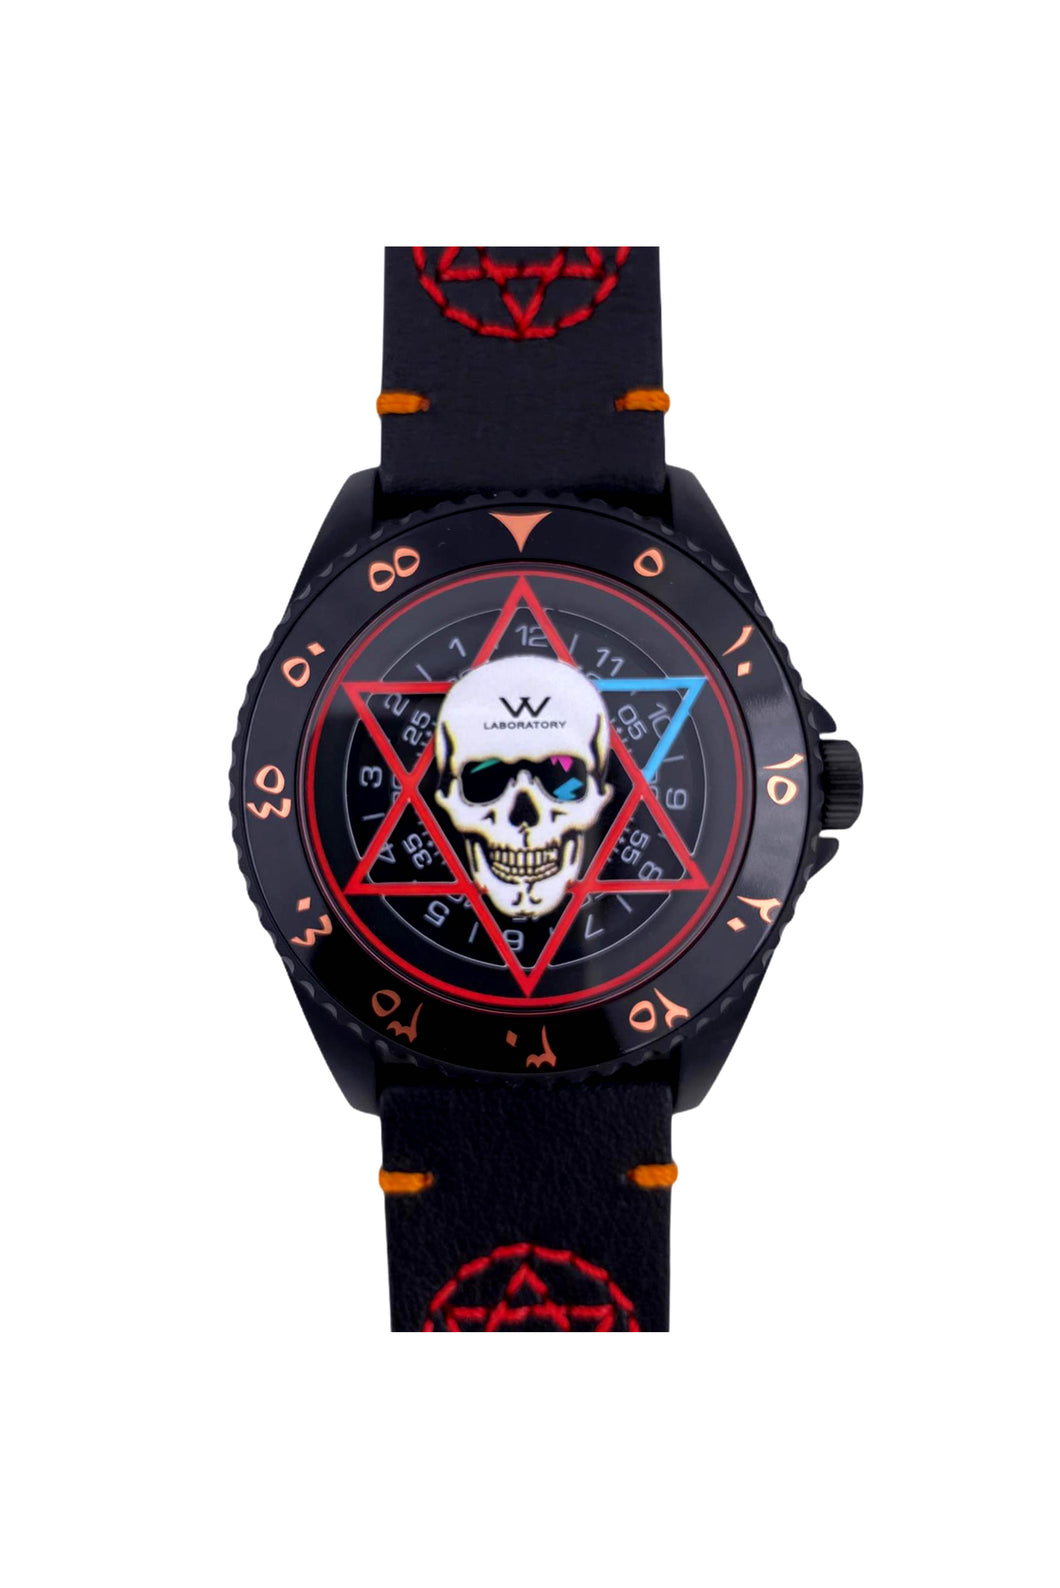 This Corum Skull is the Maddest Watch Ever | Watchfinder & Co. - YouTube